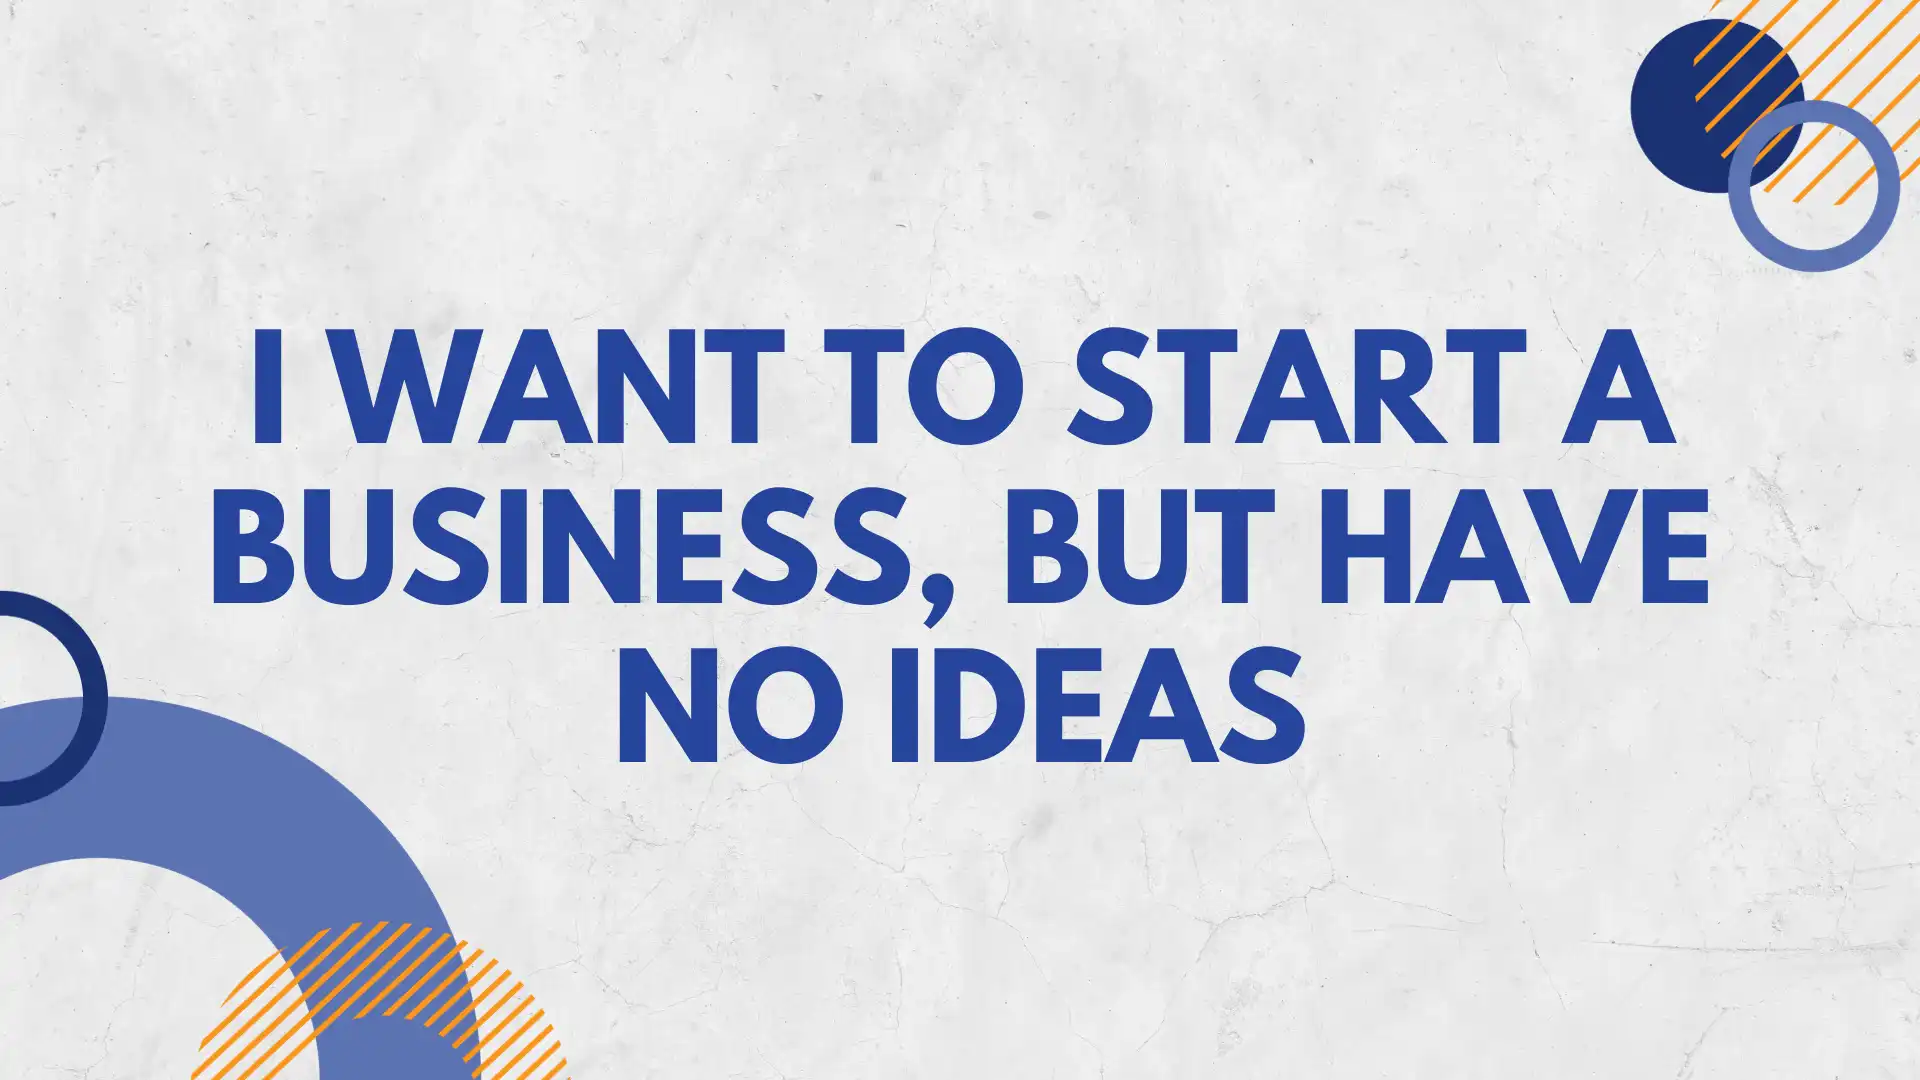 i want to start a business, but have no ideas